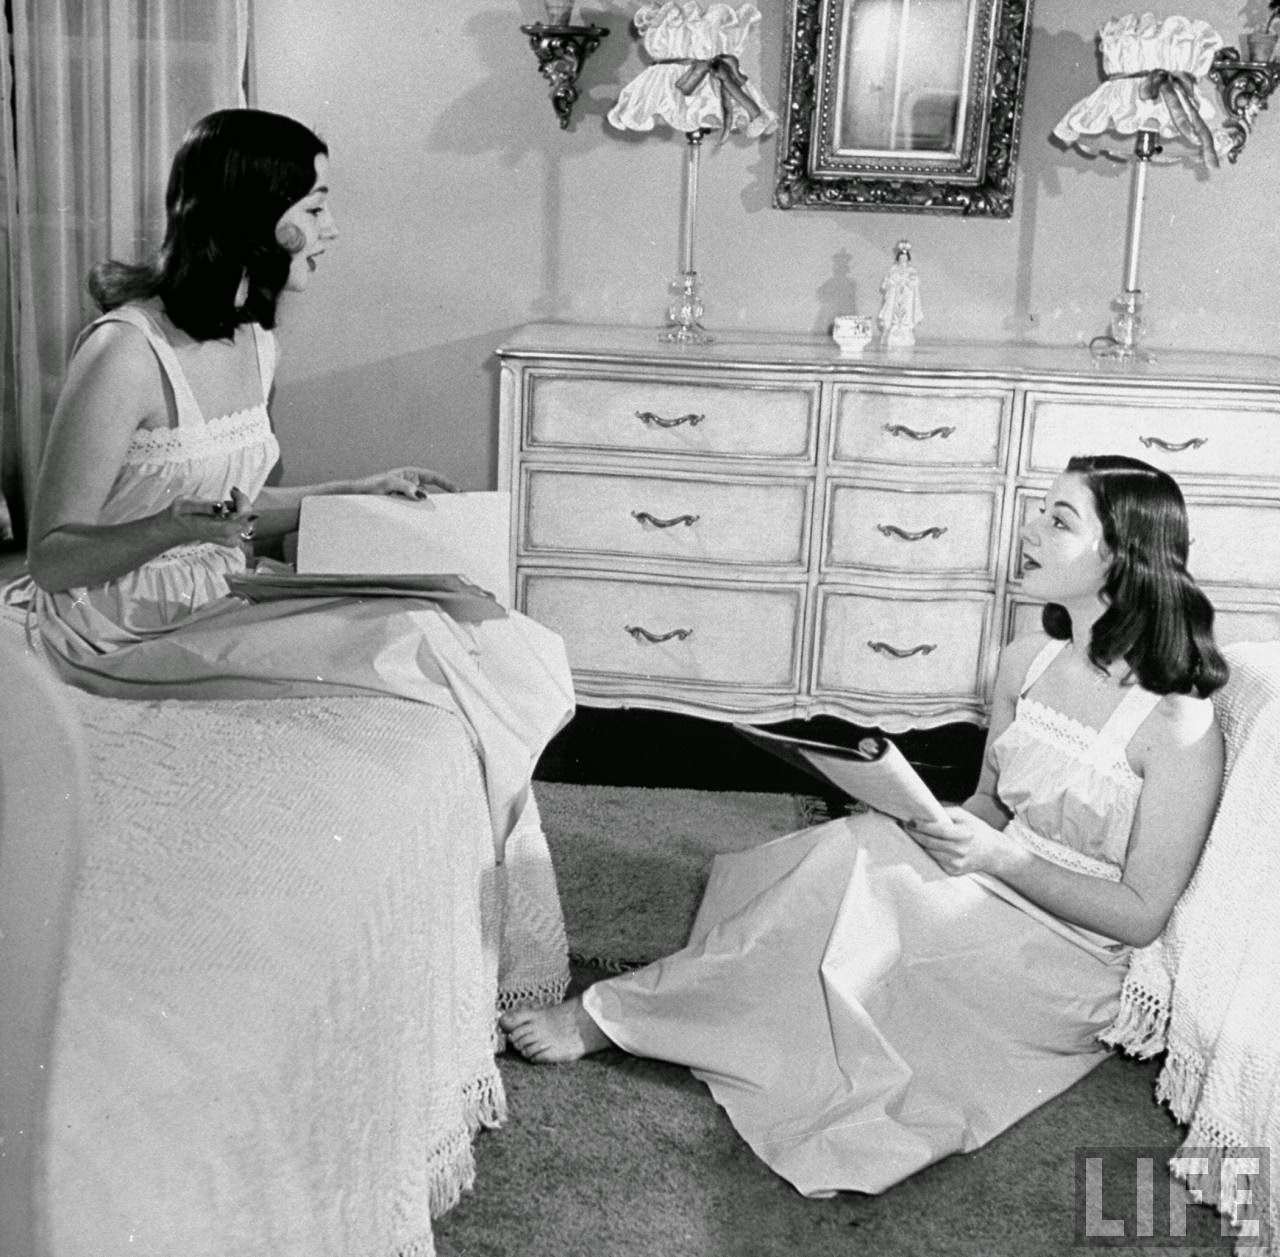 The O'Connor twins Gloria and Consuelo, sitting in bedroom, 1947